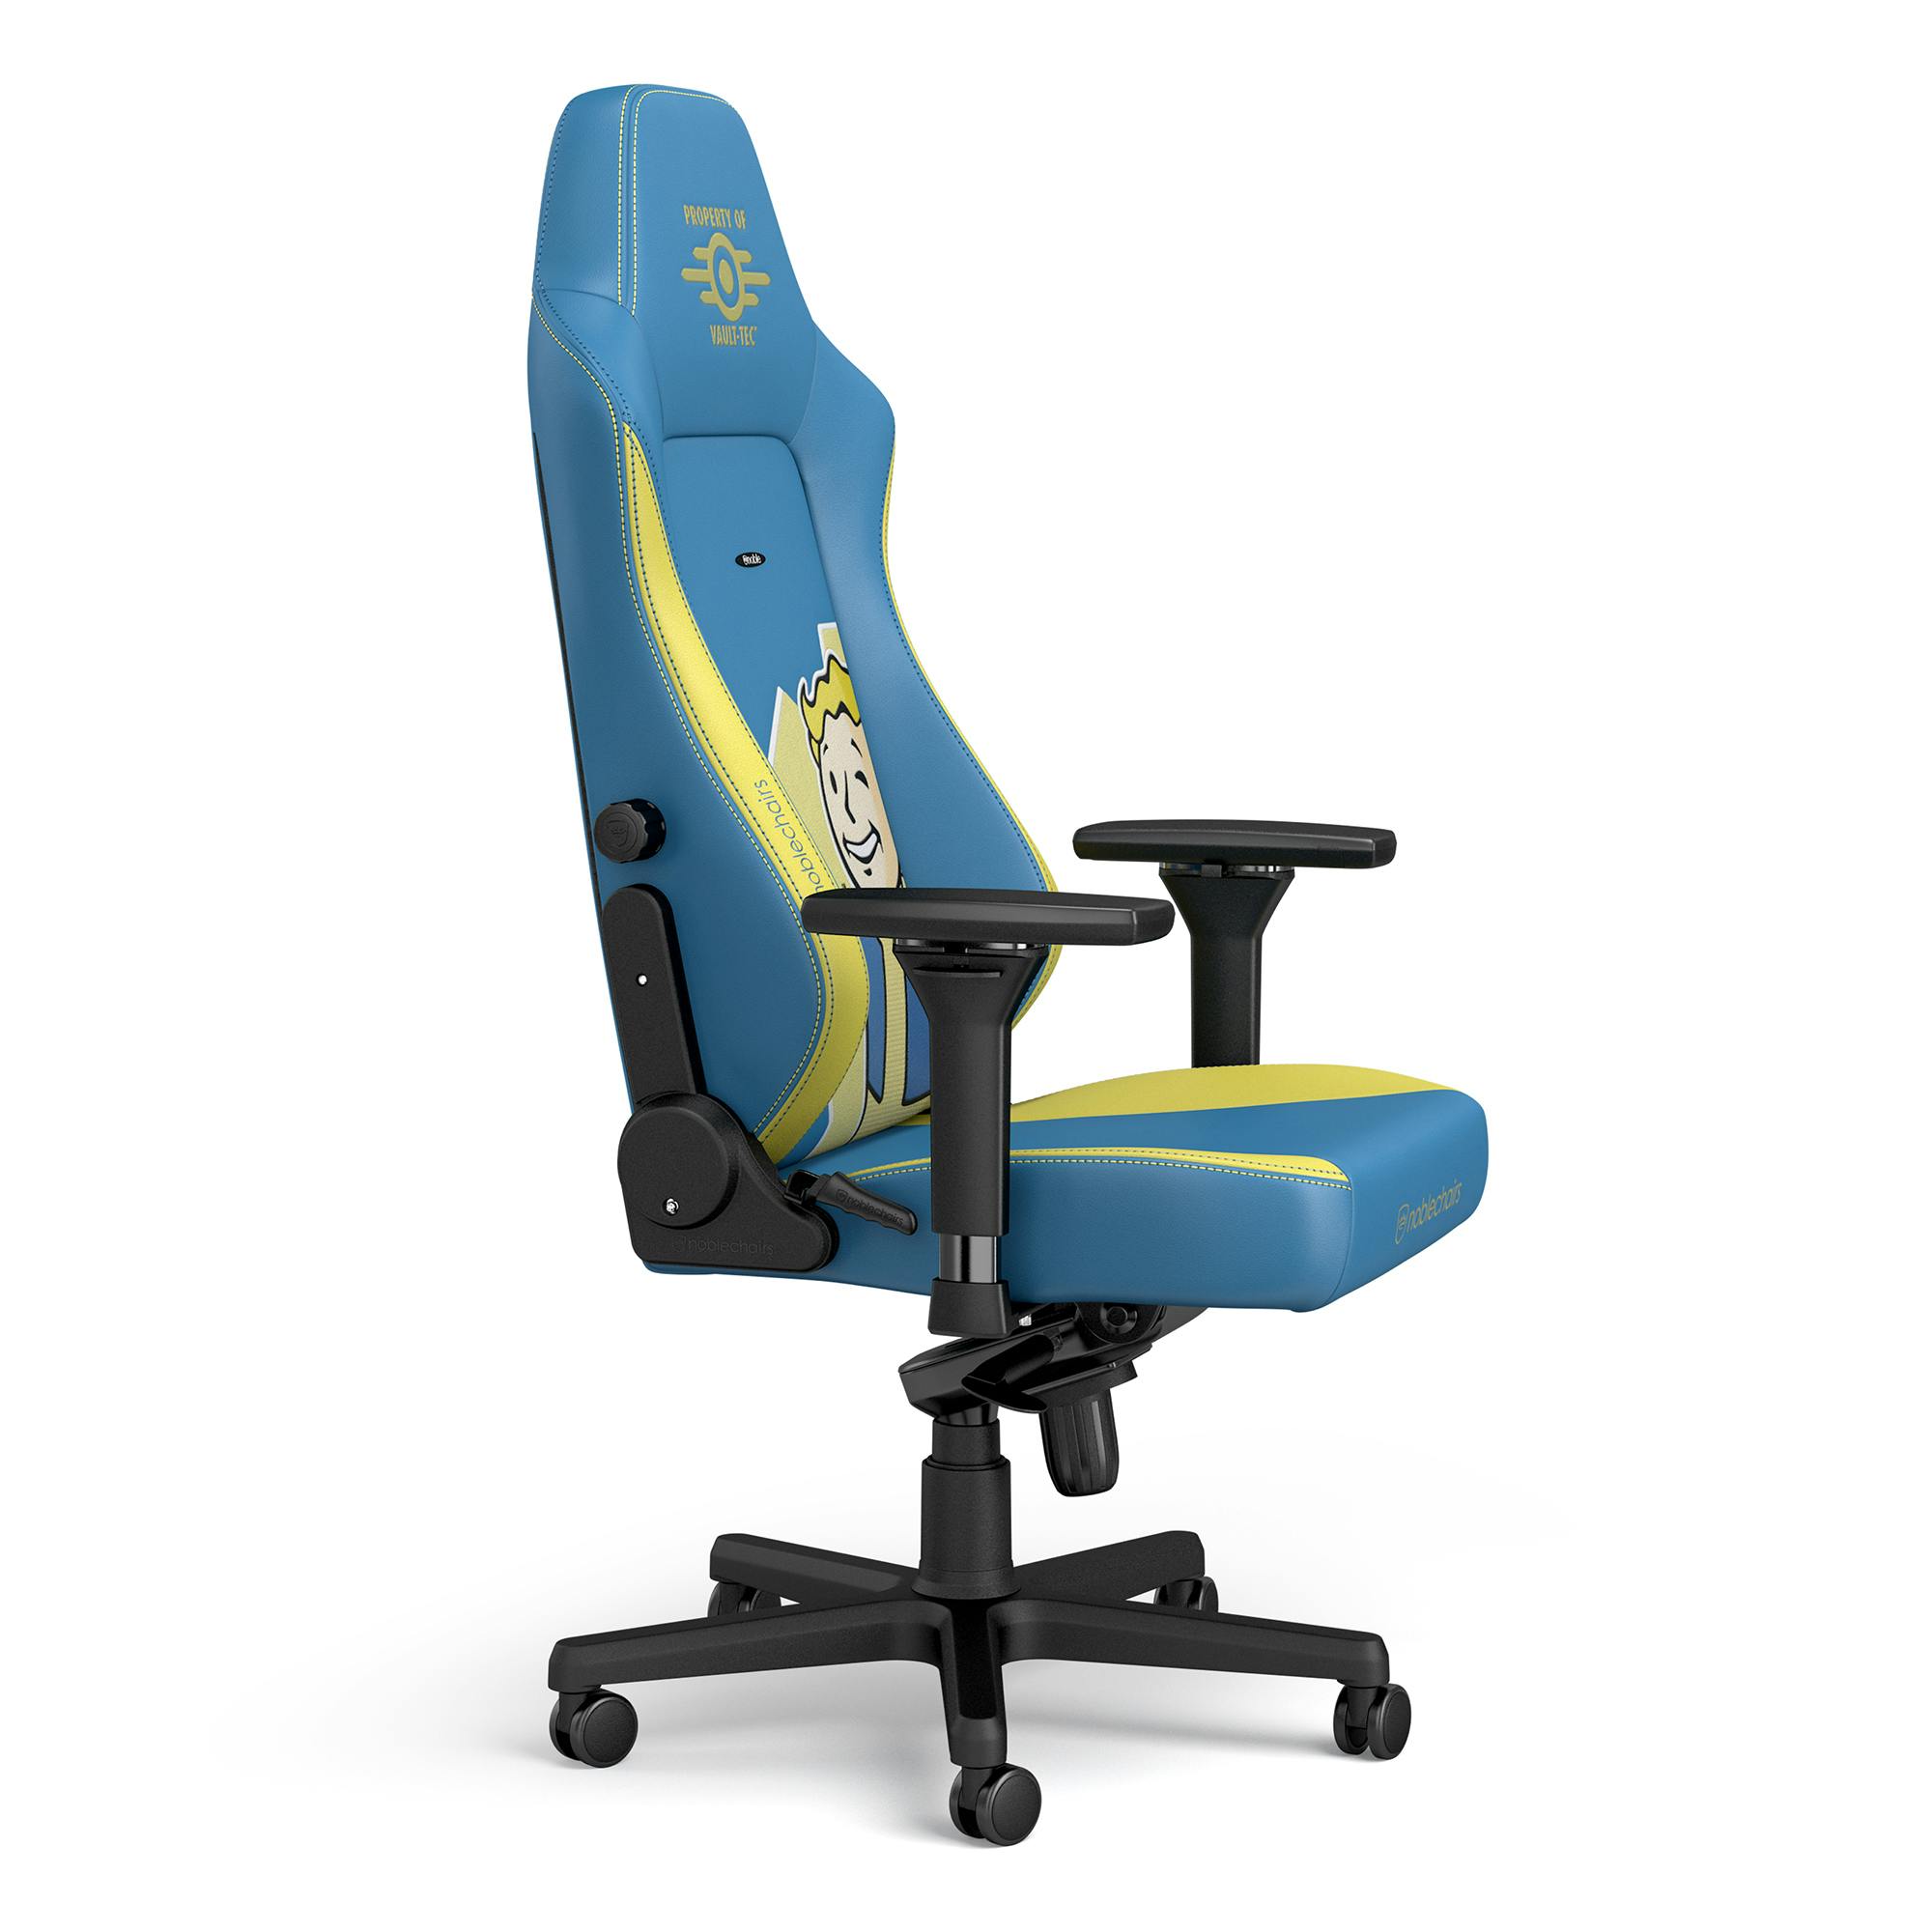 noblechairs - HERO Fallout Vault-Tec Edition